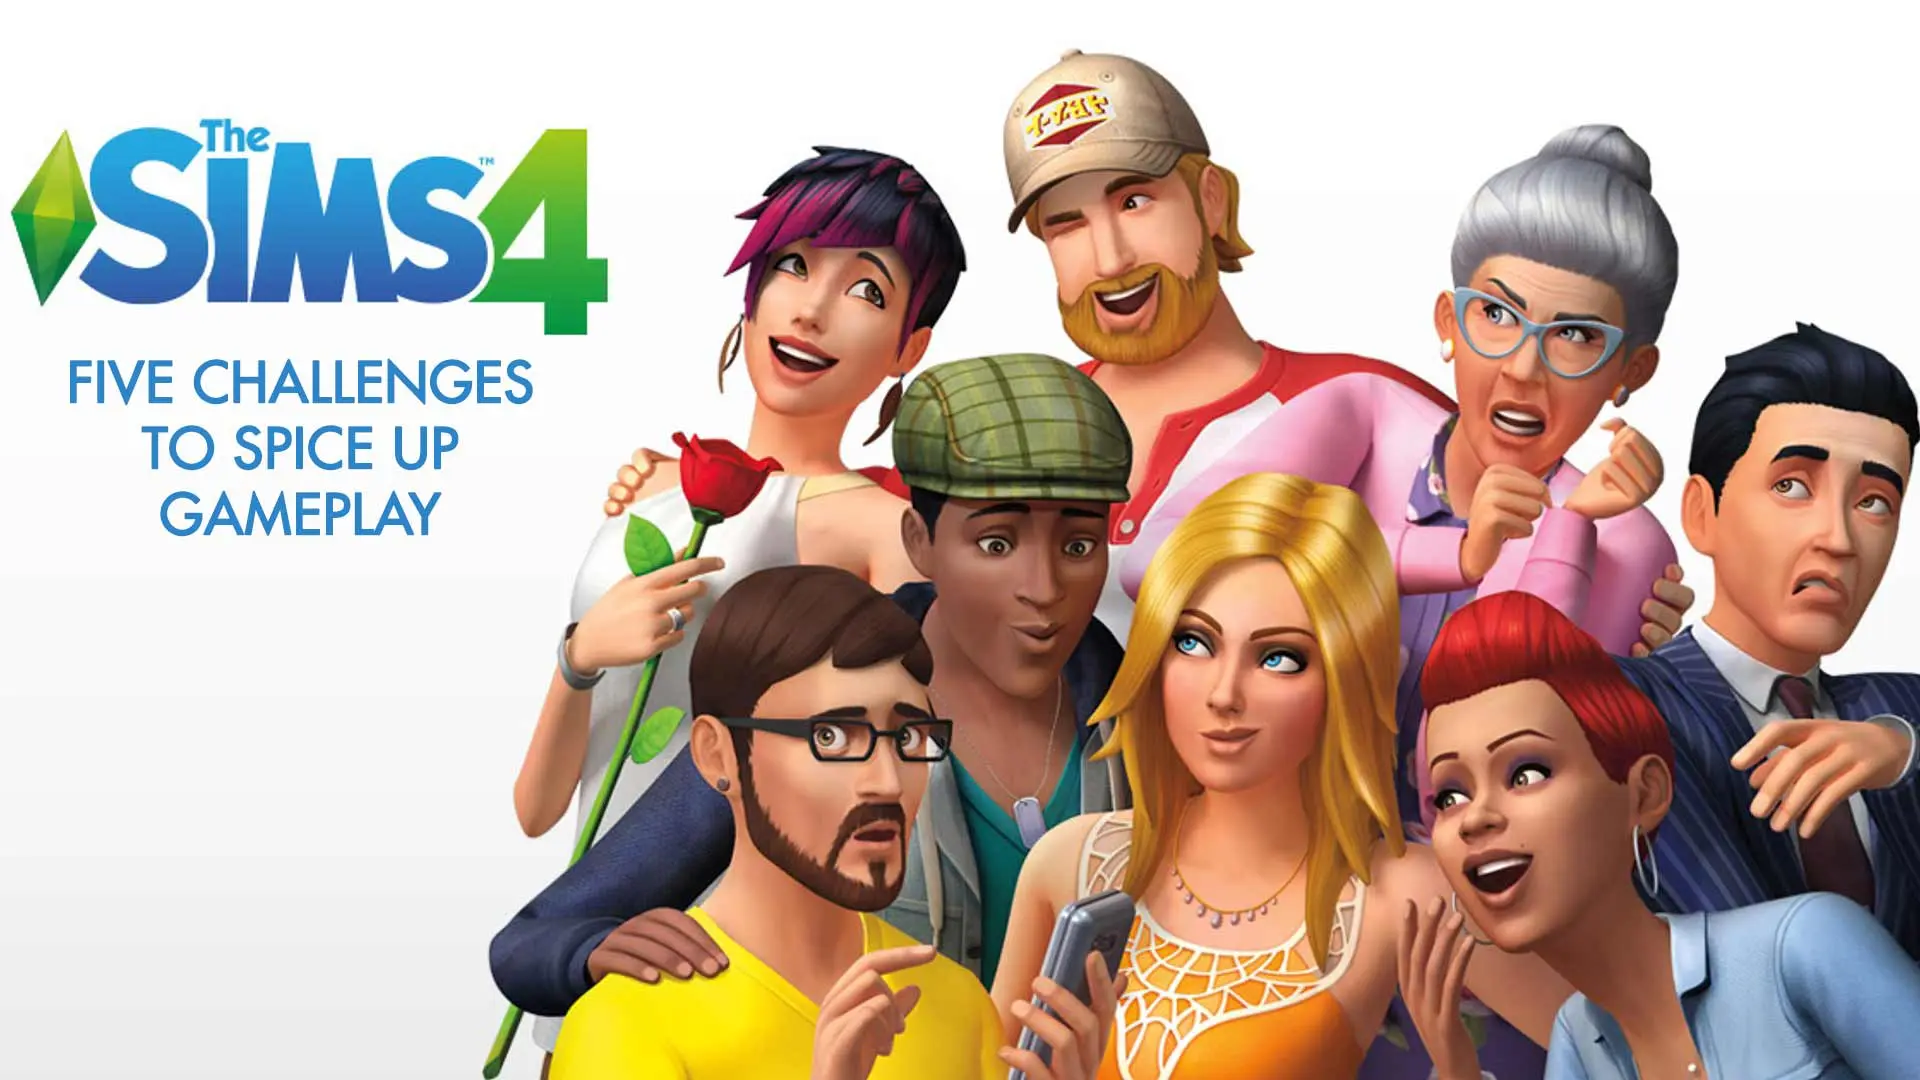 The Sims 4 five challenges